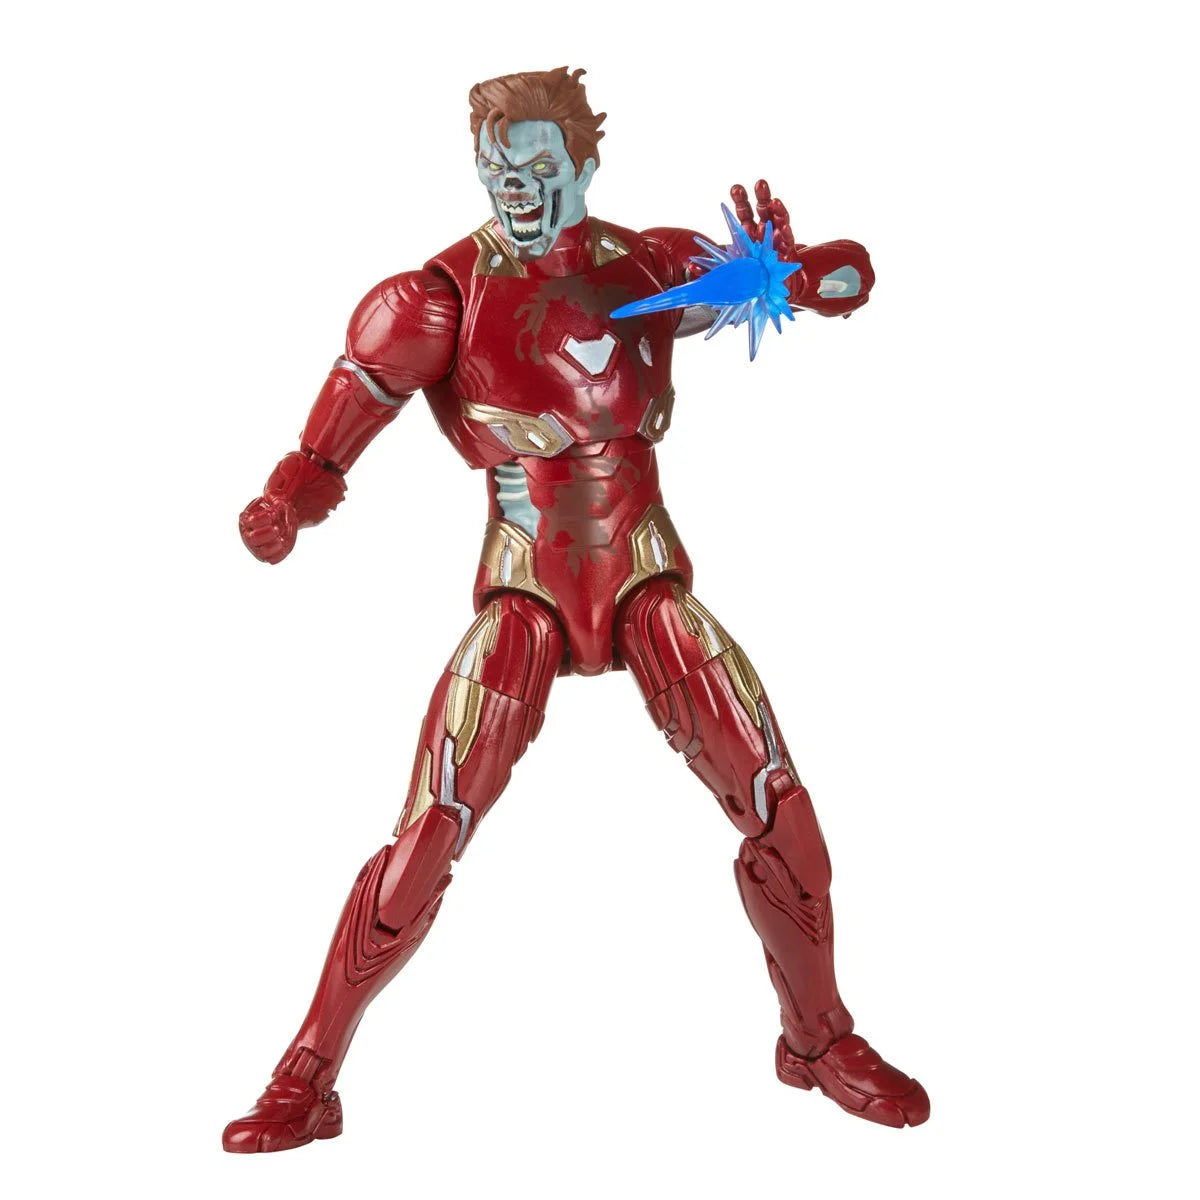 Marvel Legends What If? Zombie Iron Man 6-Inch Action Figure